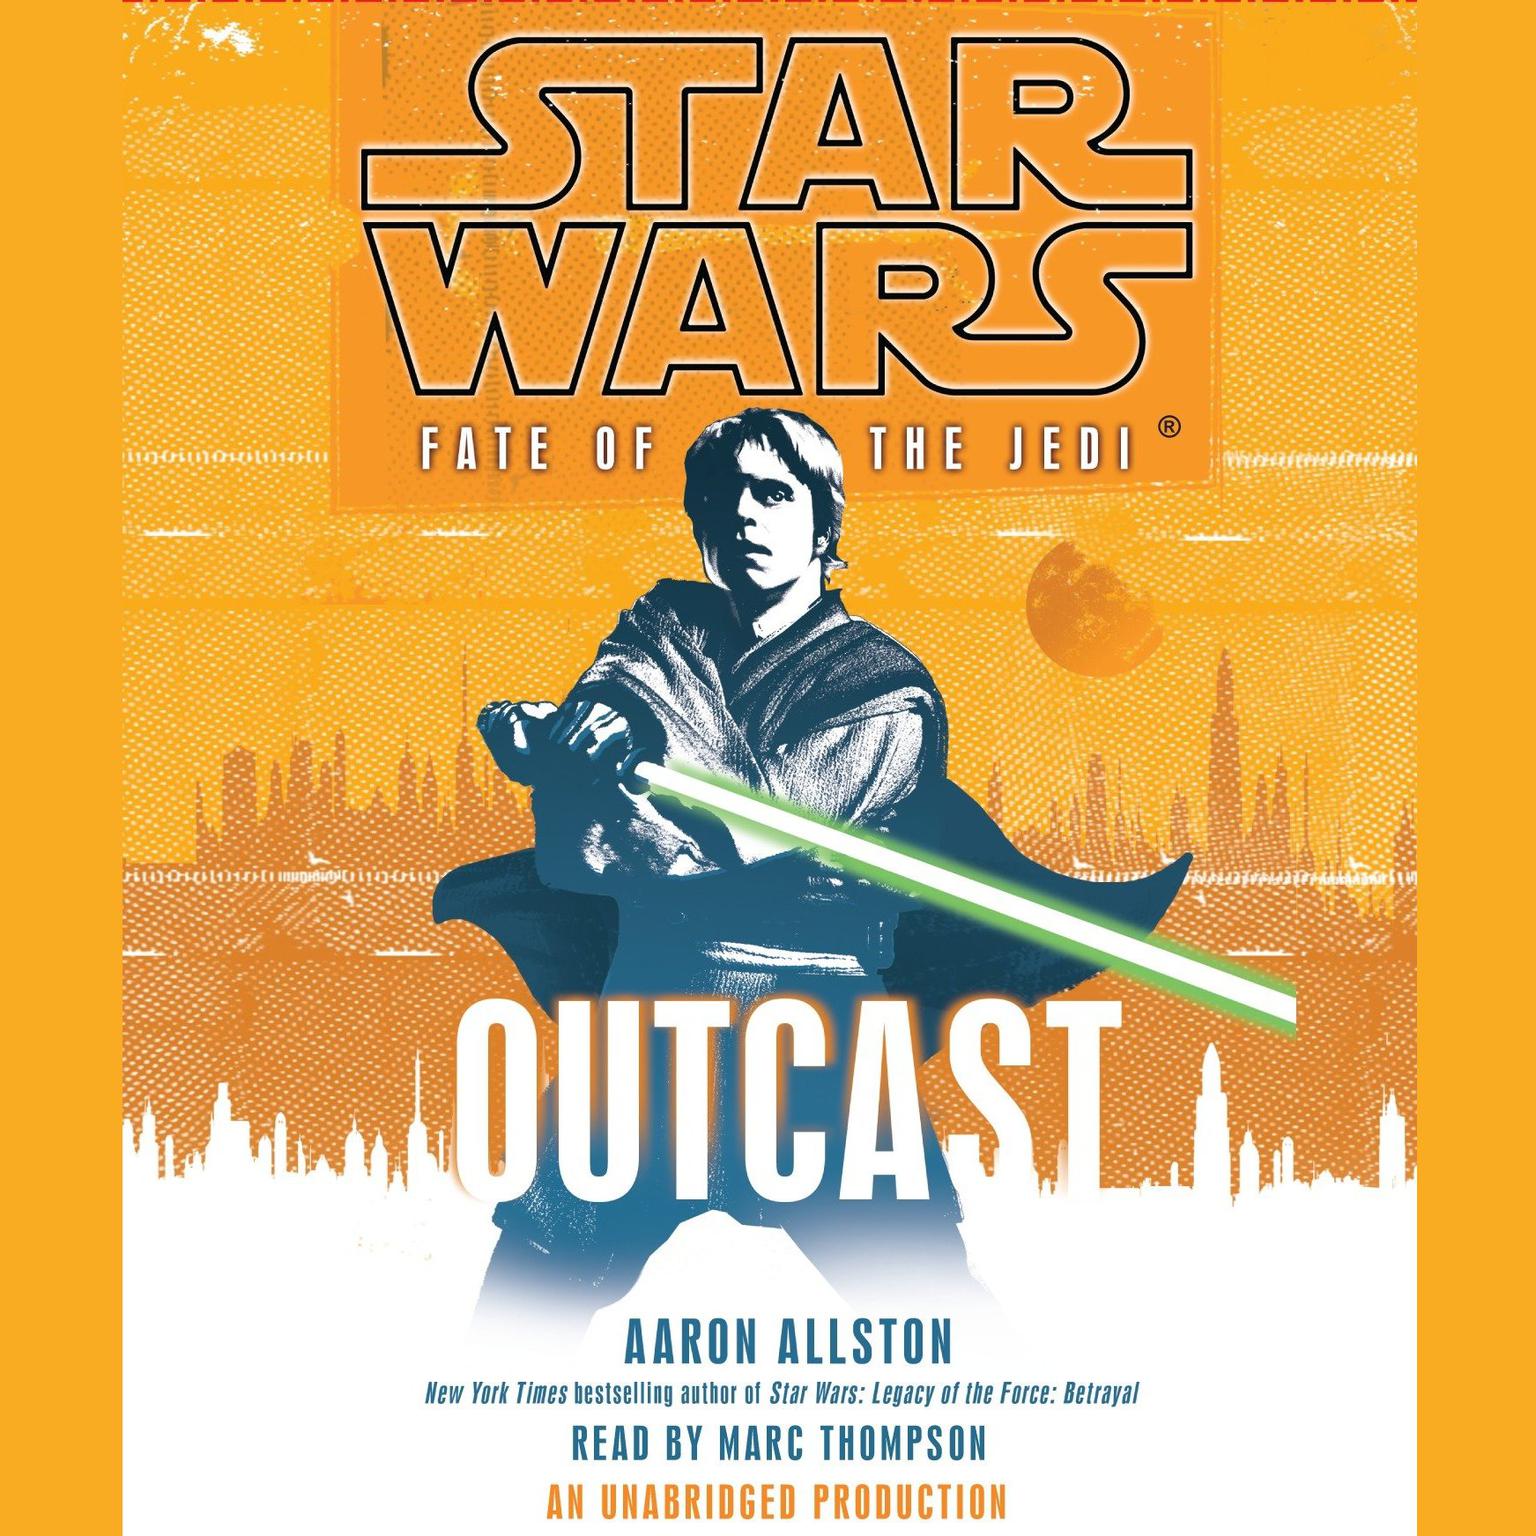 Outcast: Star Wars Legends (Fate of the Jedi) Audiobook, by Aaron Allston